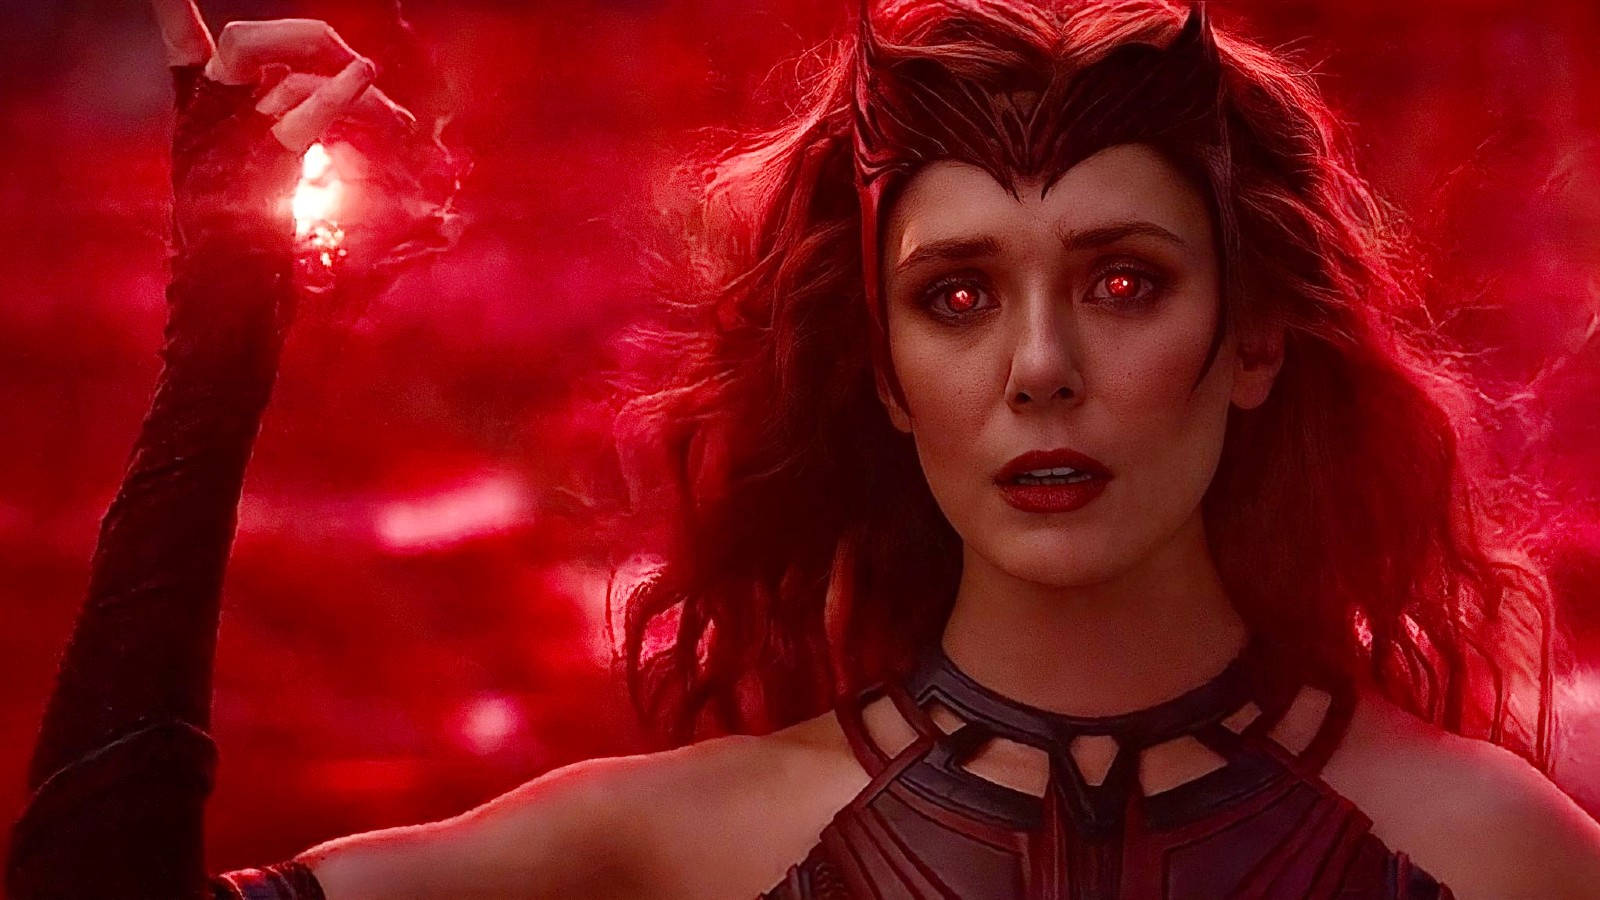 Wandamaximoff Scarlet Witch Would Be Translated To 